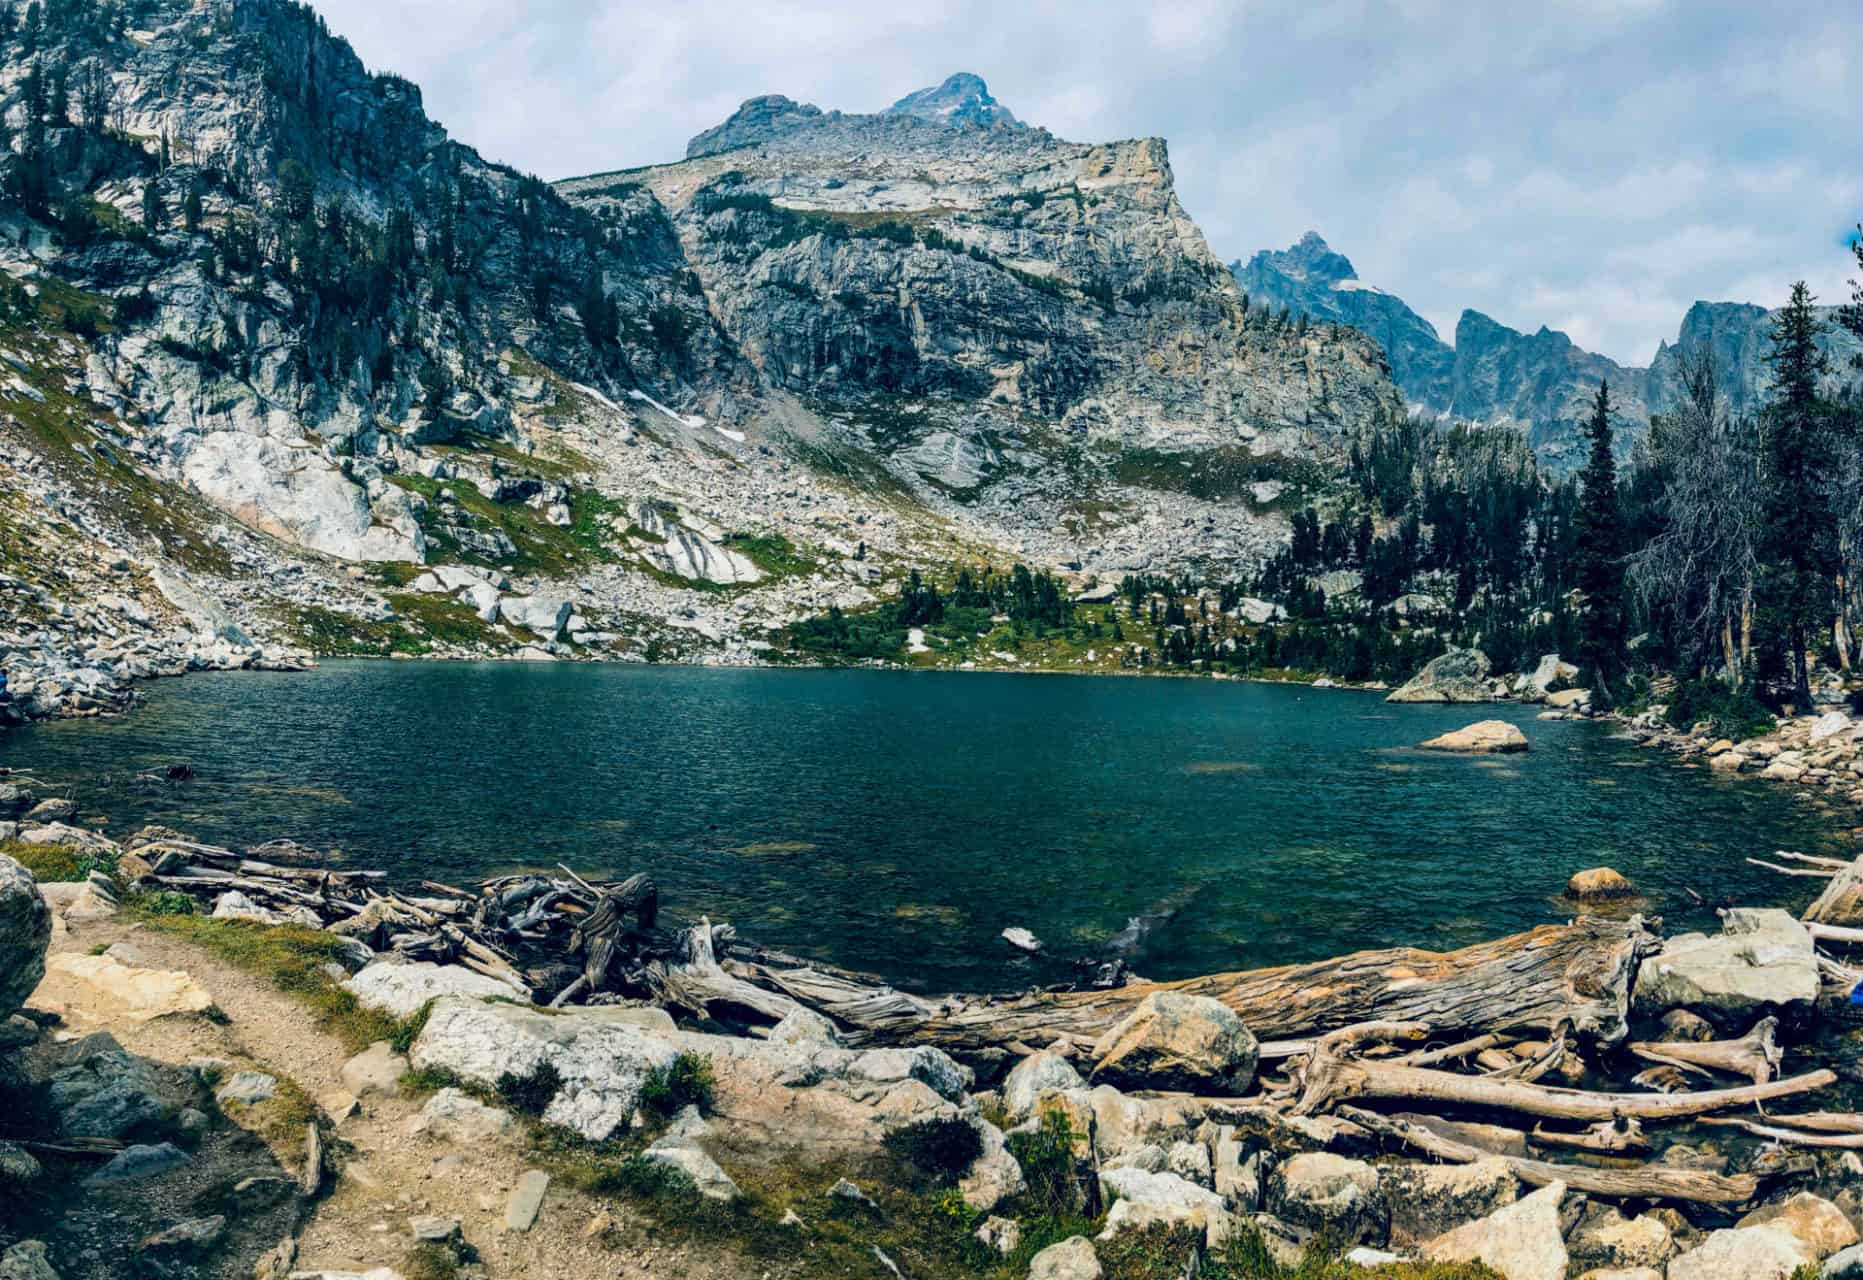 Backpacking To Surprise and Amphitheater Lakes